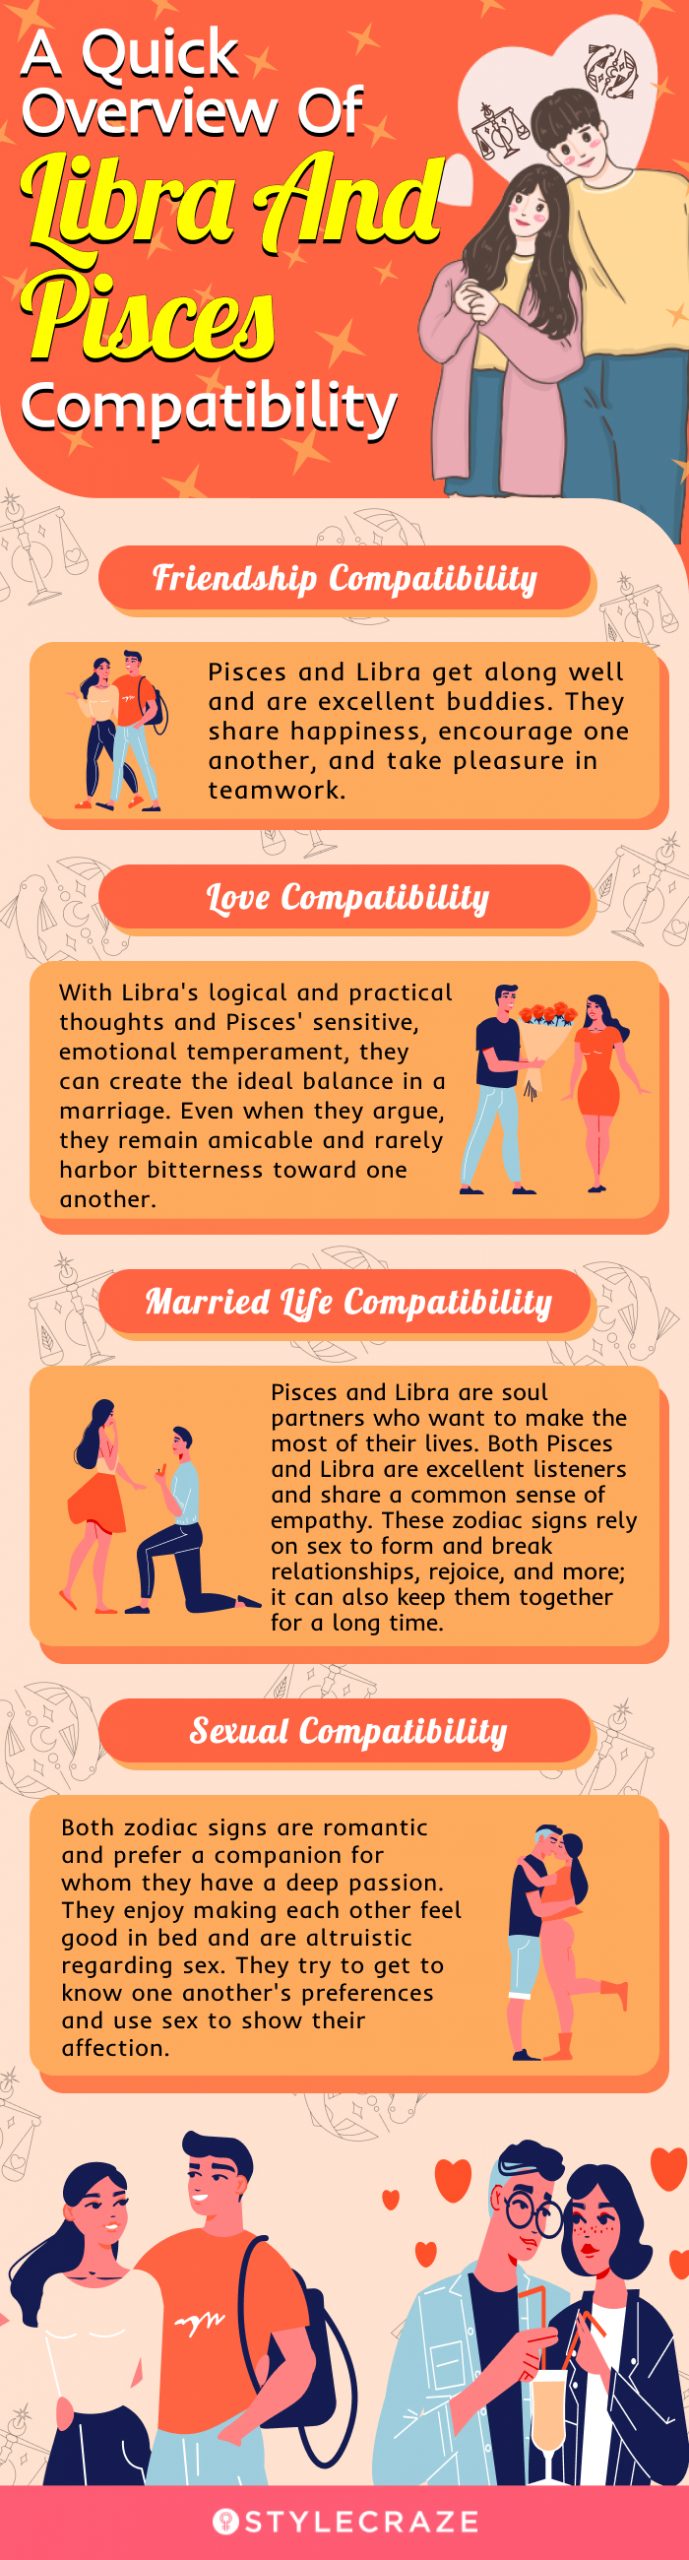 a quick overview of libra and pisces compatibility (infographic)